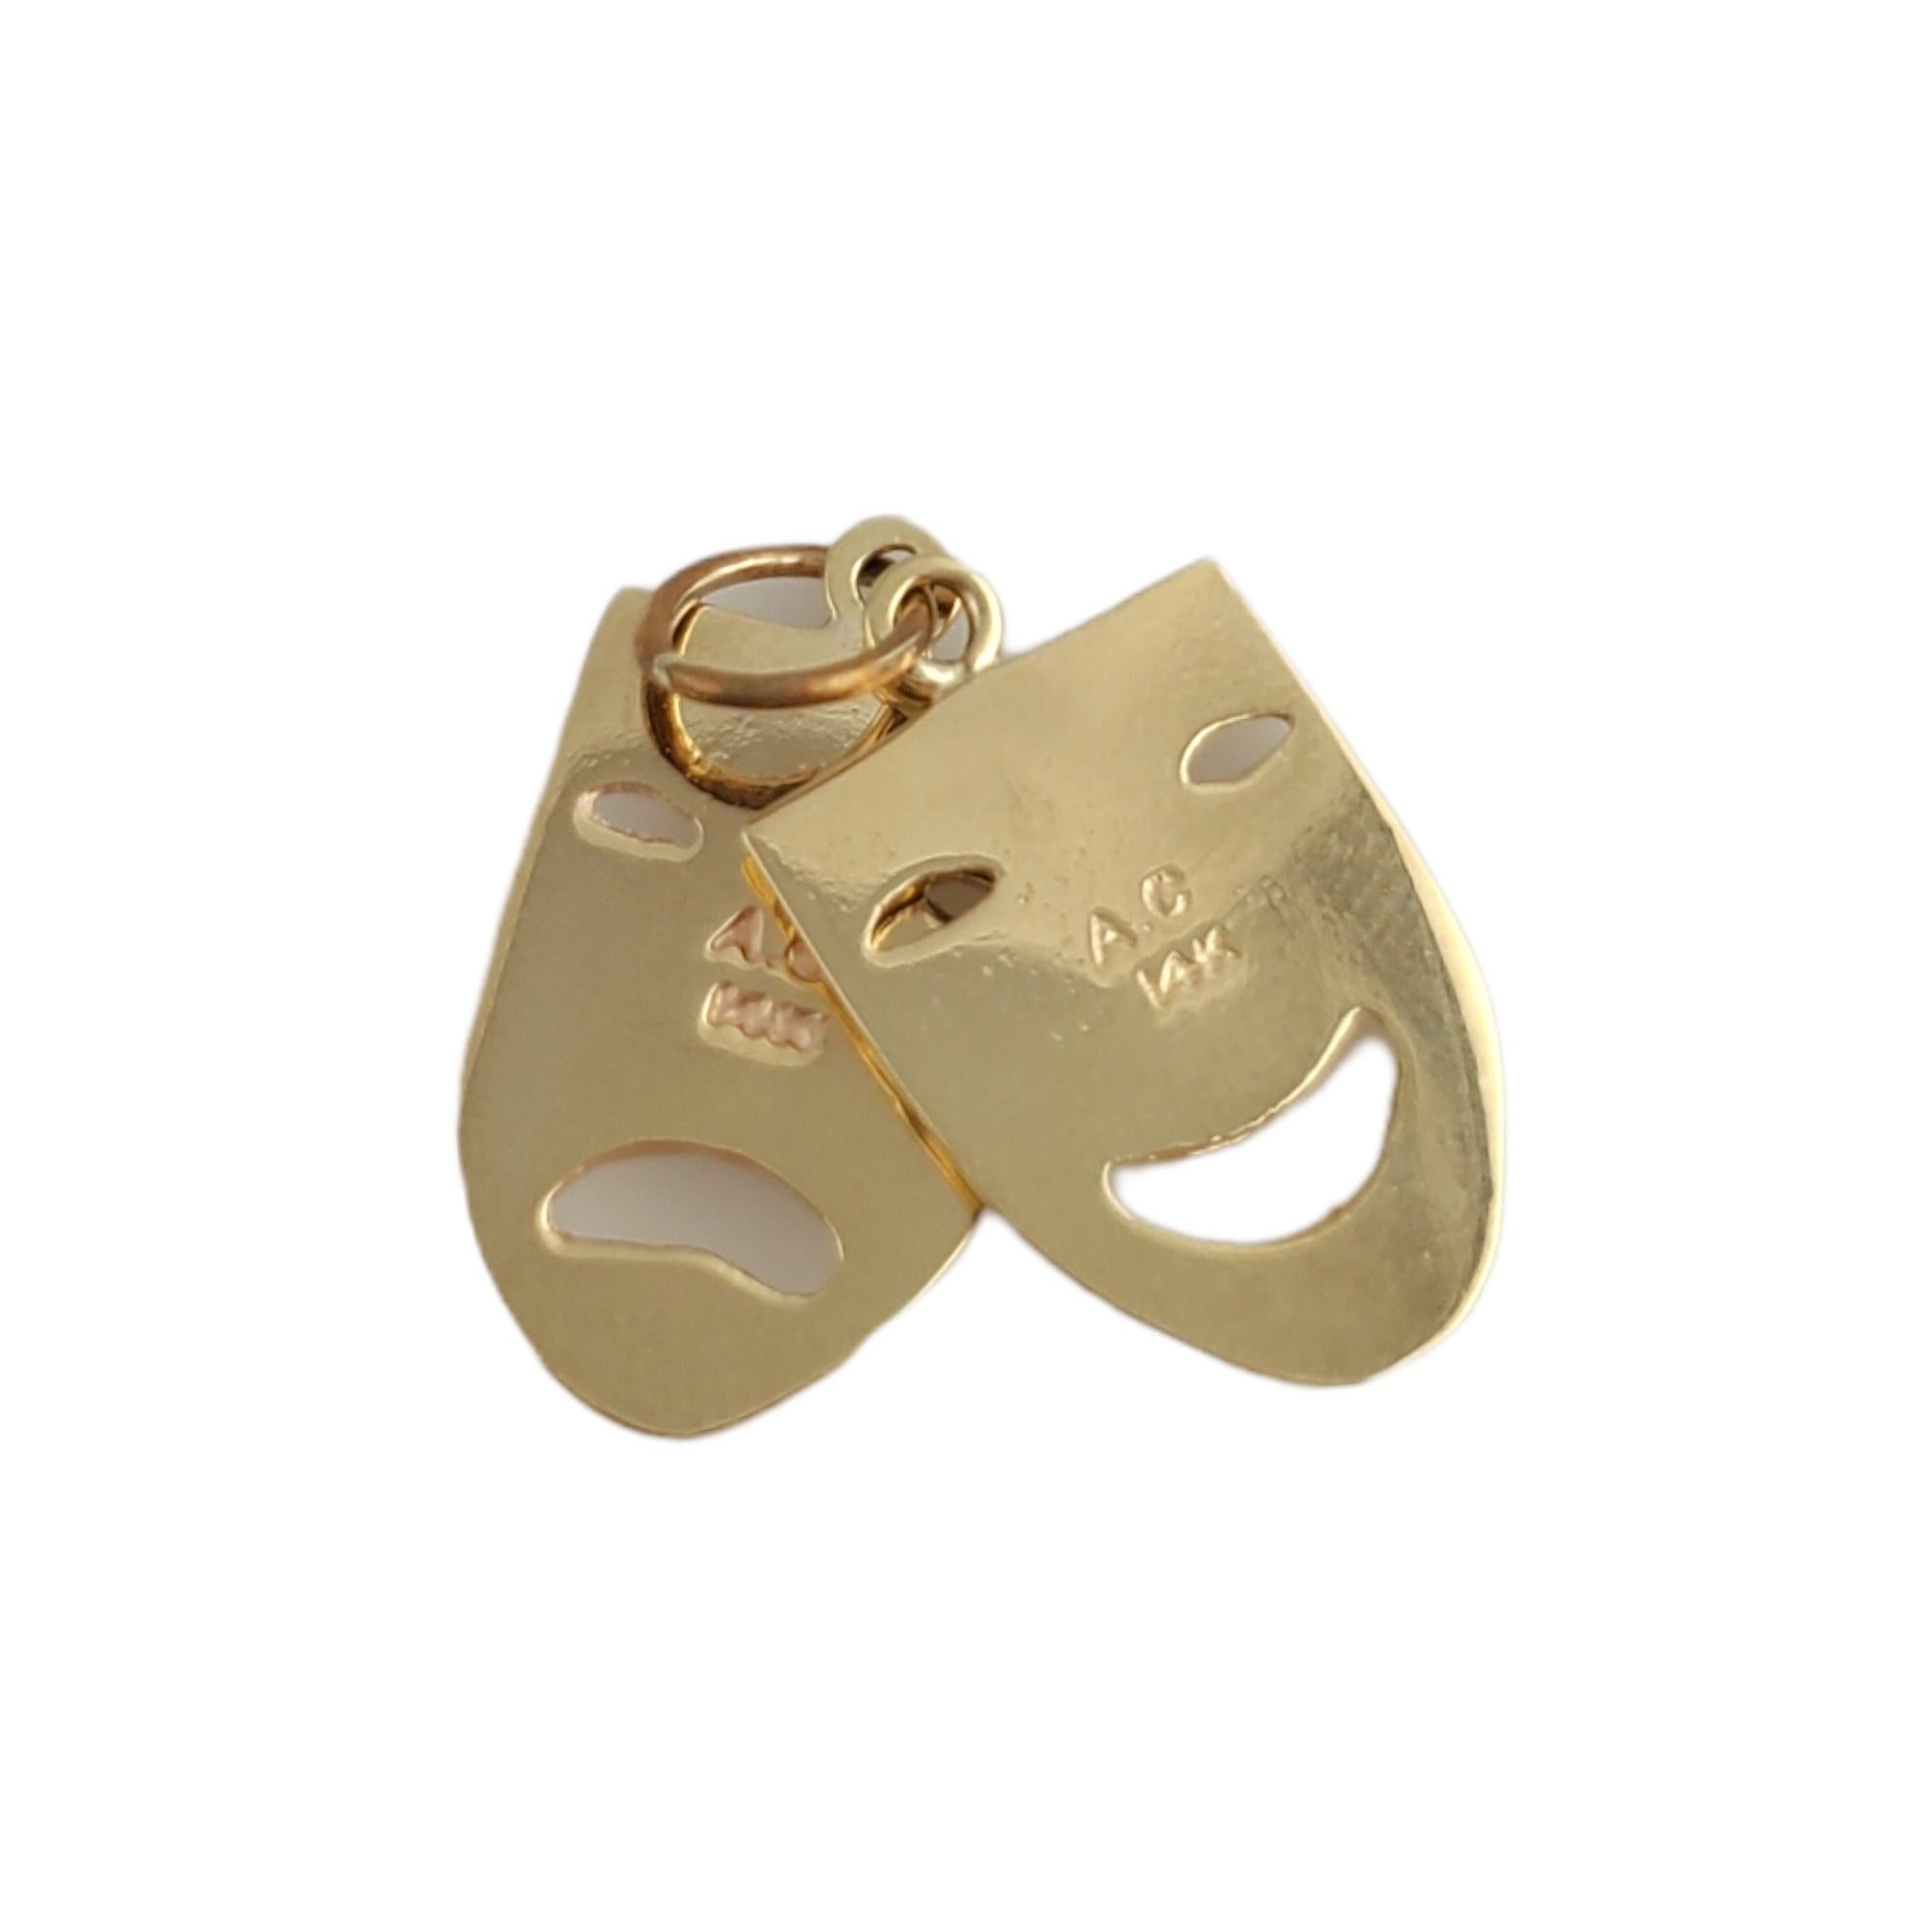 14K Yellow Gold Comedy & Tragedy Mask Charm

You'll love this beautiful yellow gold comedy & tragedy mask charm! 

Size: 11.89mm X 19.60mm

Weight:  3.3 gr /  2.1dwt

Hallmark:  A.C 14K 

Very good condition, professionally polished.

Will come